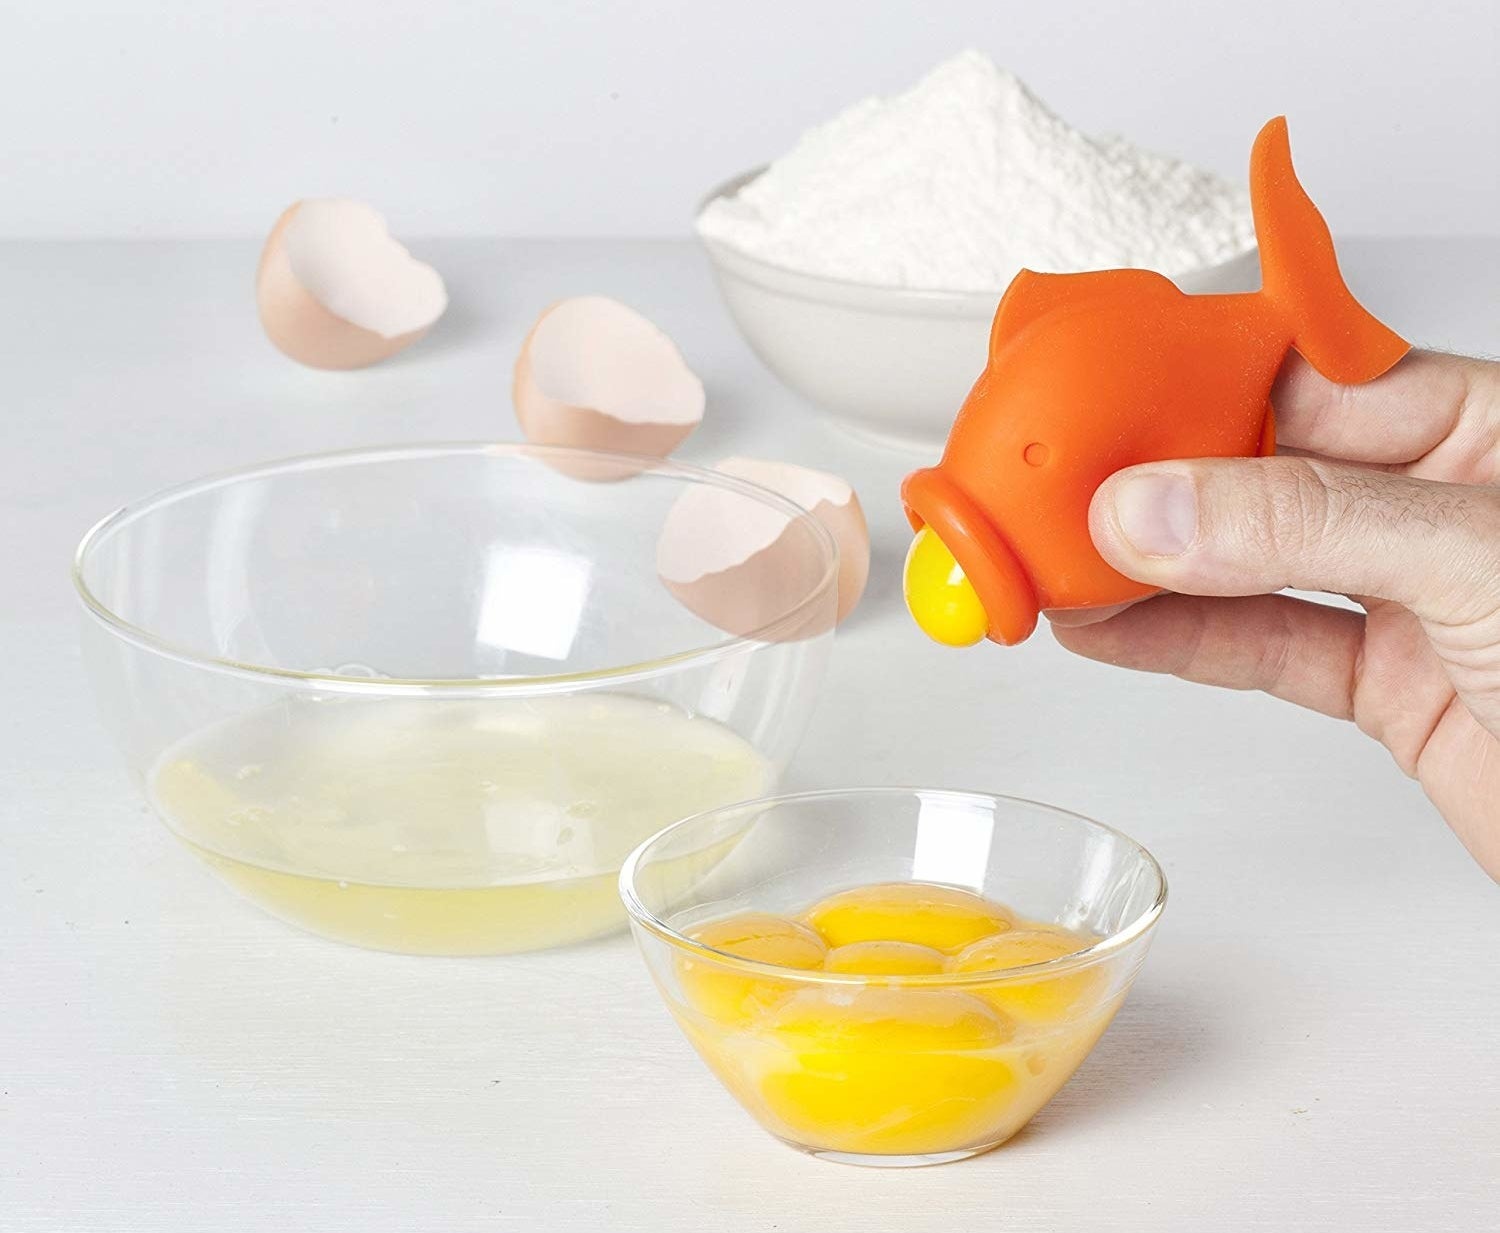 Fish shaped suction tool holding a yolk 